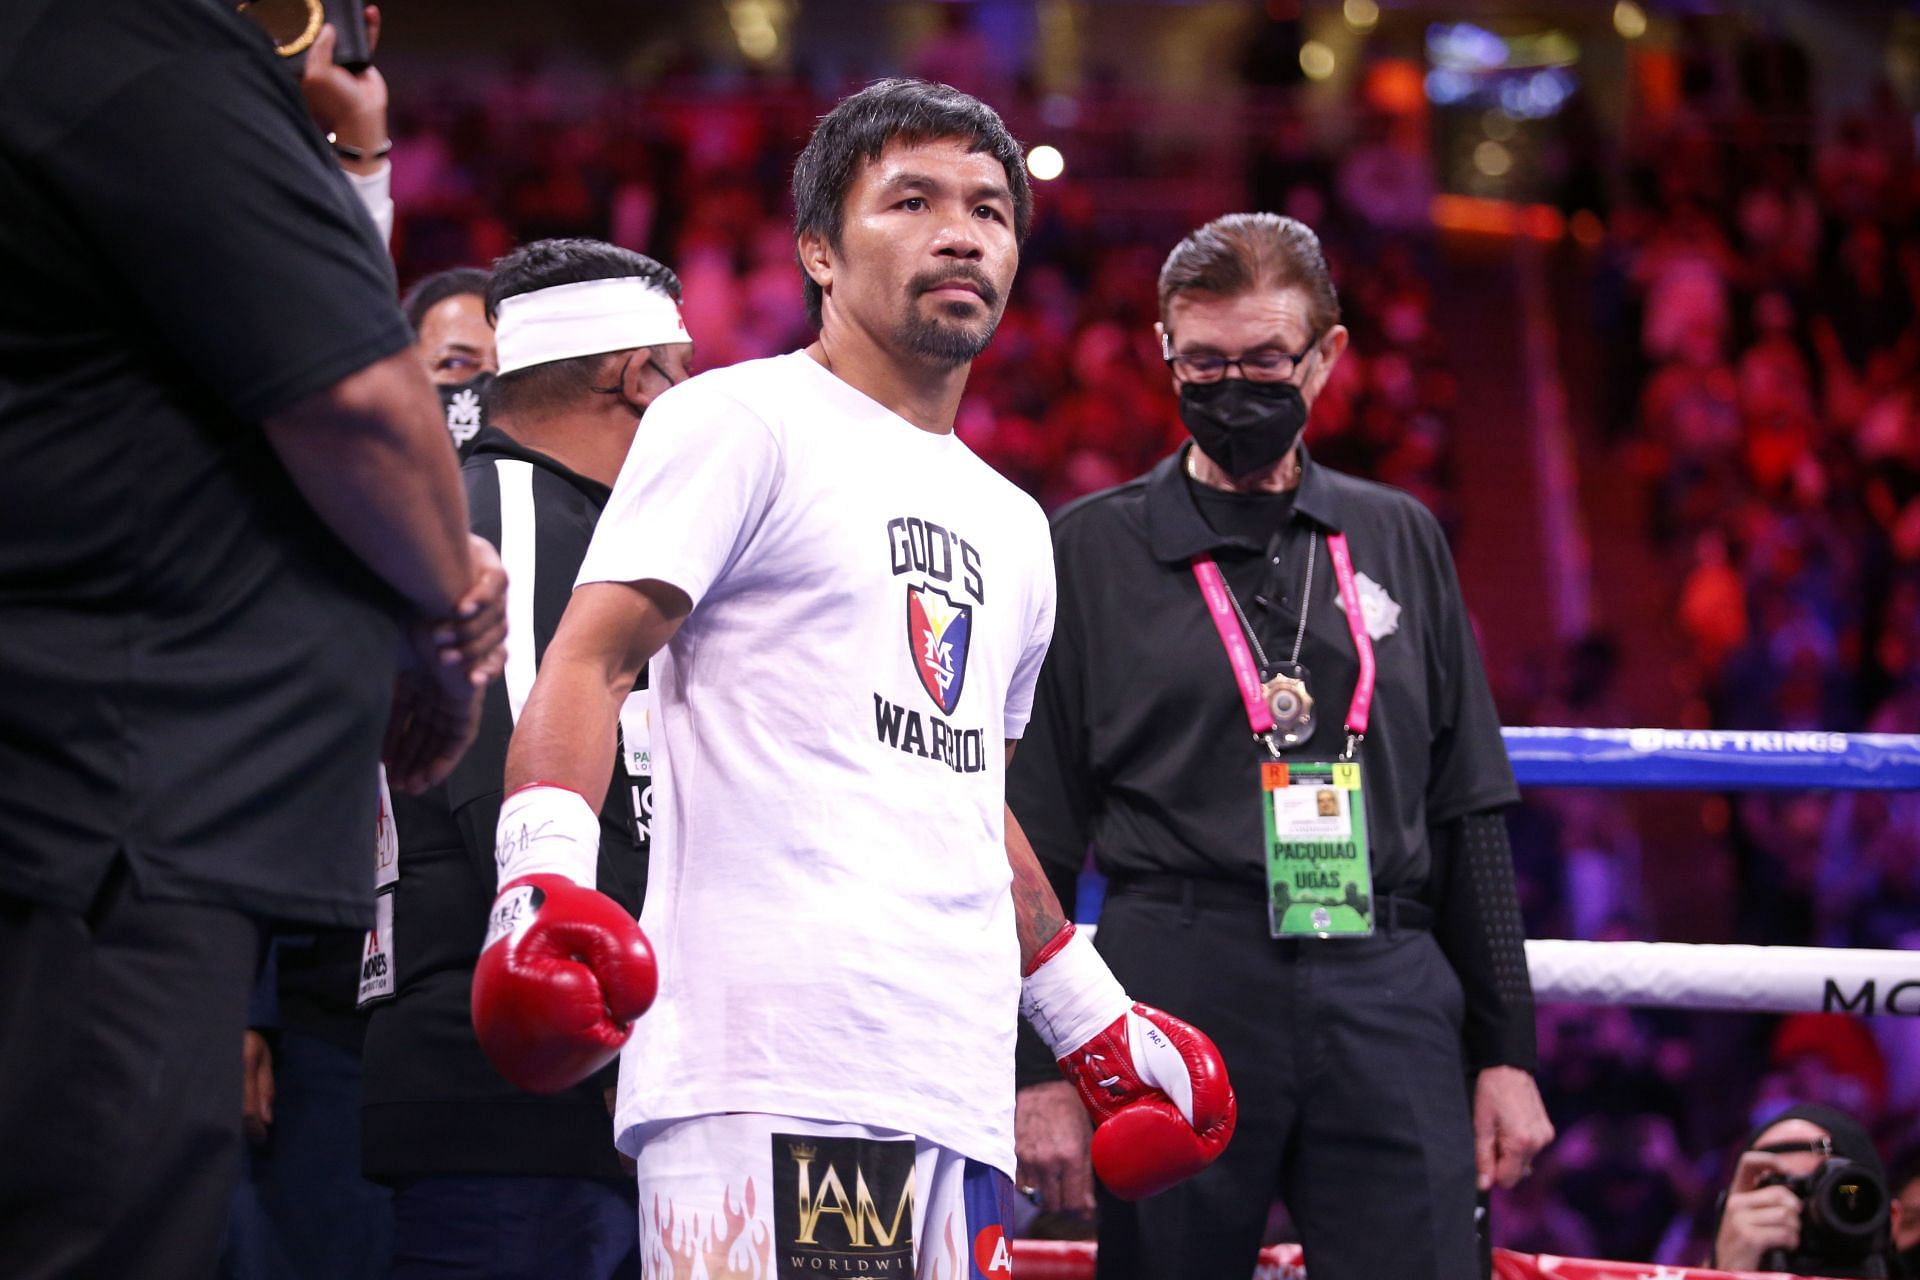 Manny Pacquiao has congratulated his son on his amateur debut